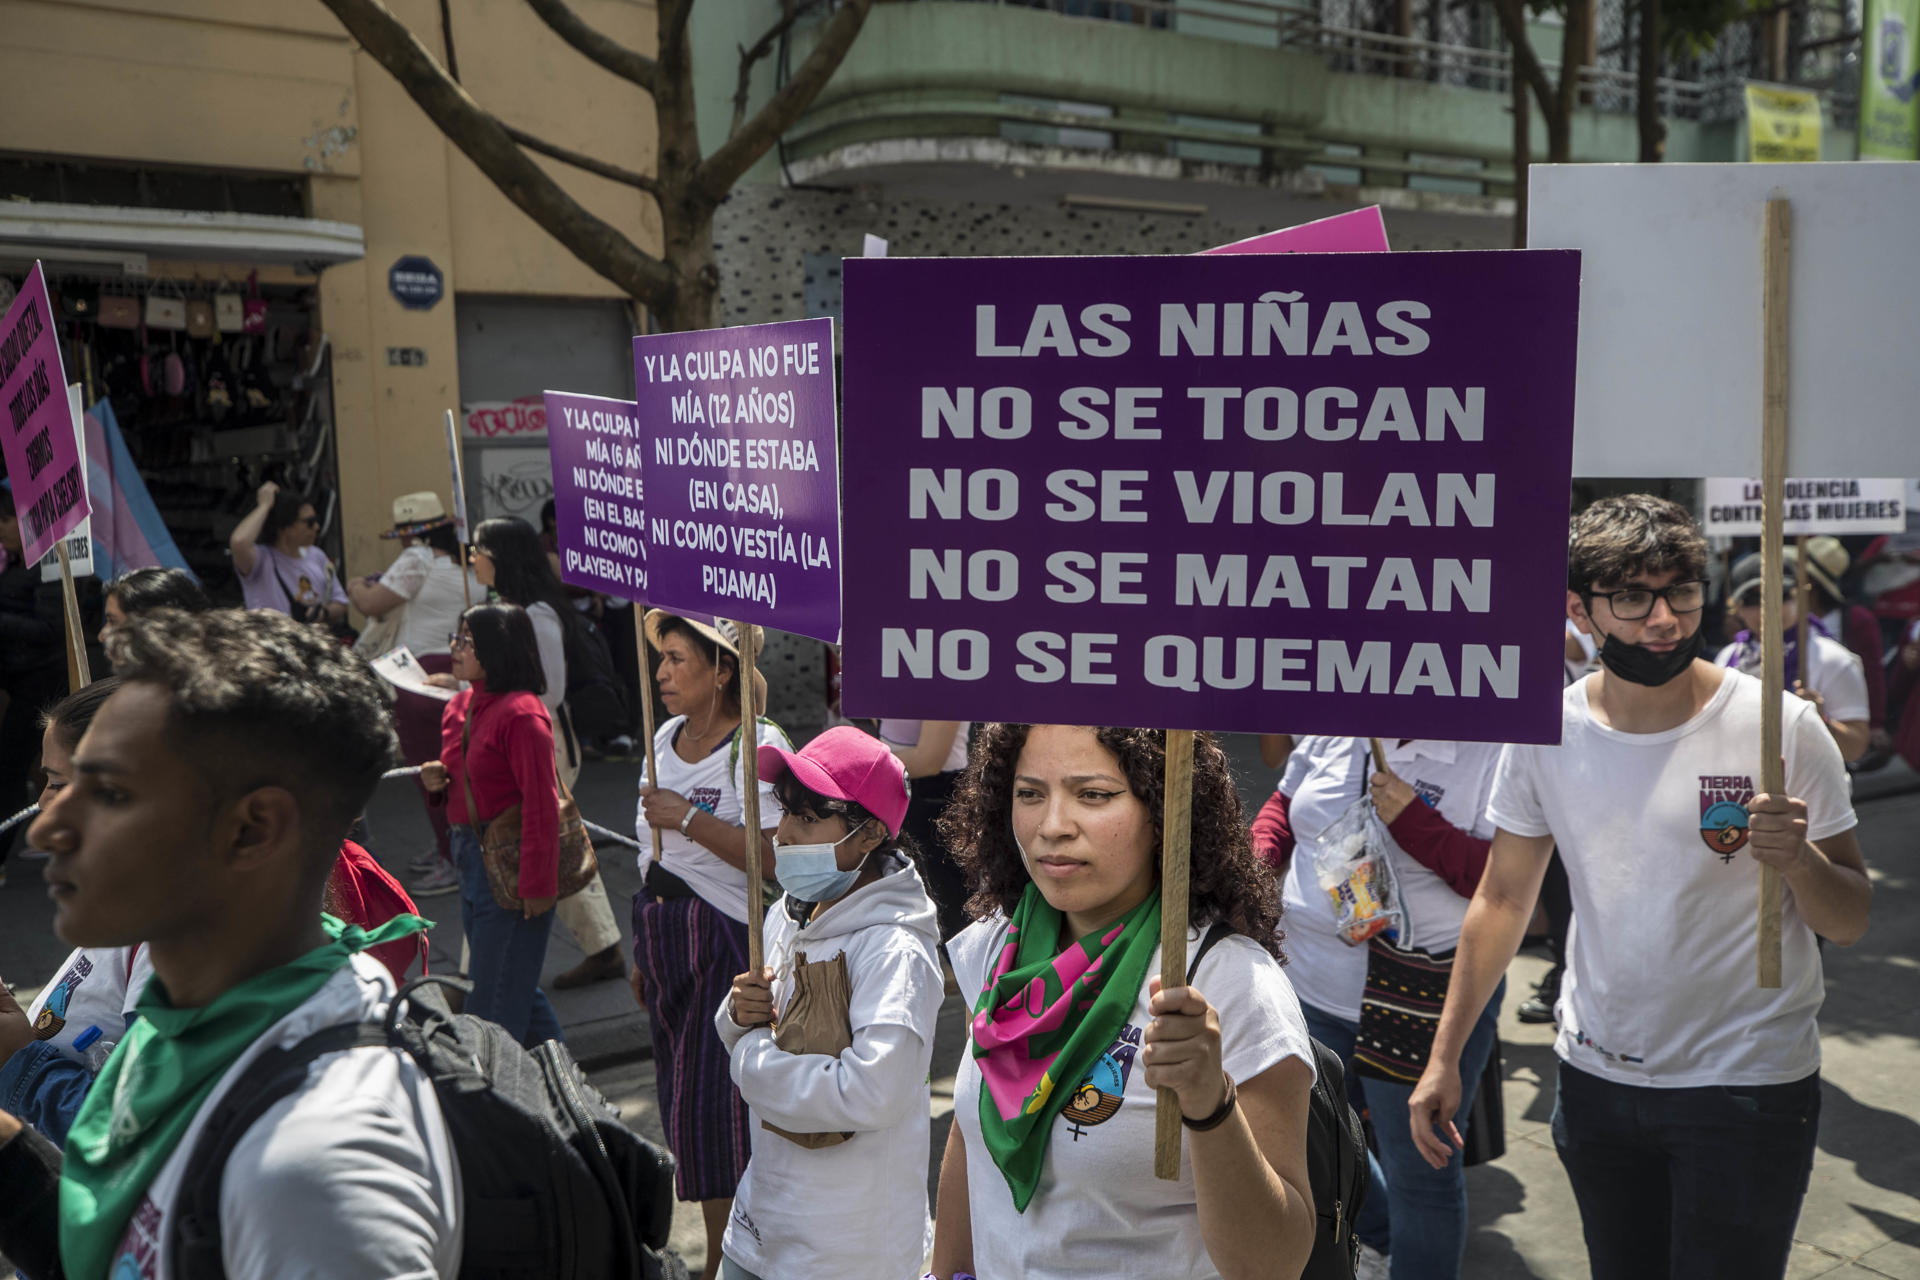 Members of feminist organizations march on March 8, 2023, in Guatemala City to demand justice in the case of a fire that killed 41 girls in 2017 at a state-run home. EFE/ Esteban Biba